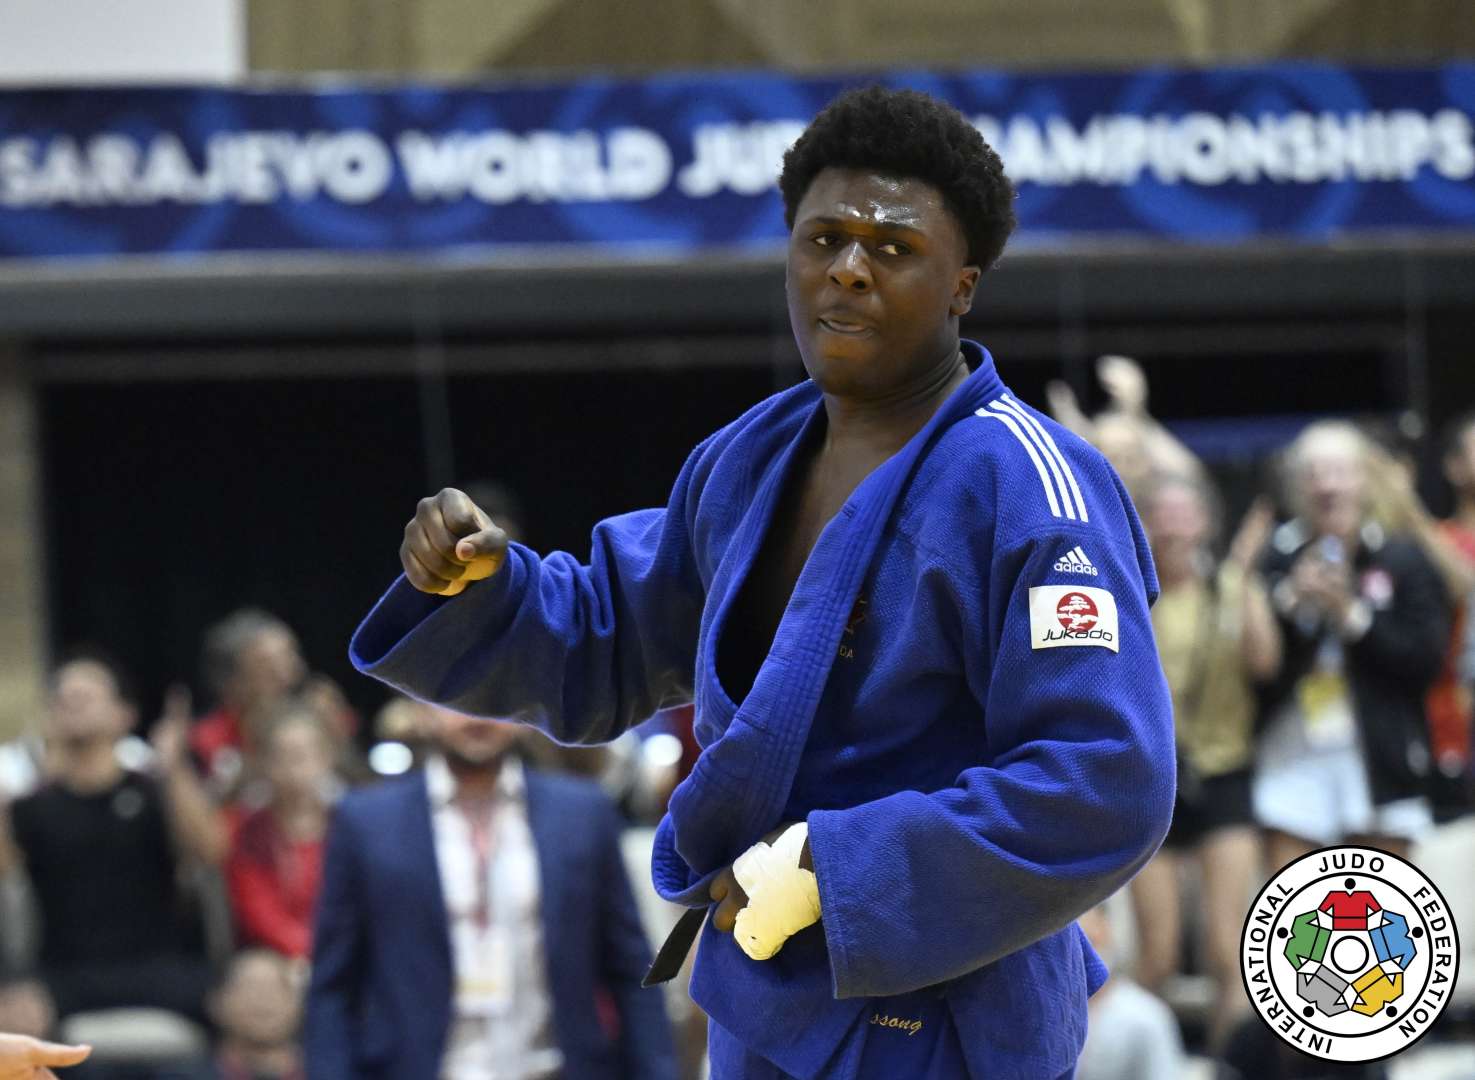 1287_20220827_ijf_day4_final_bra_santos_can_messe_a_bessong_90kg_c_lm